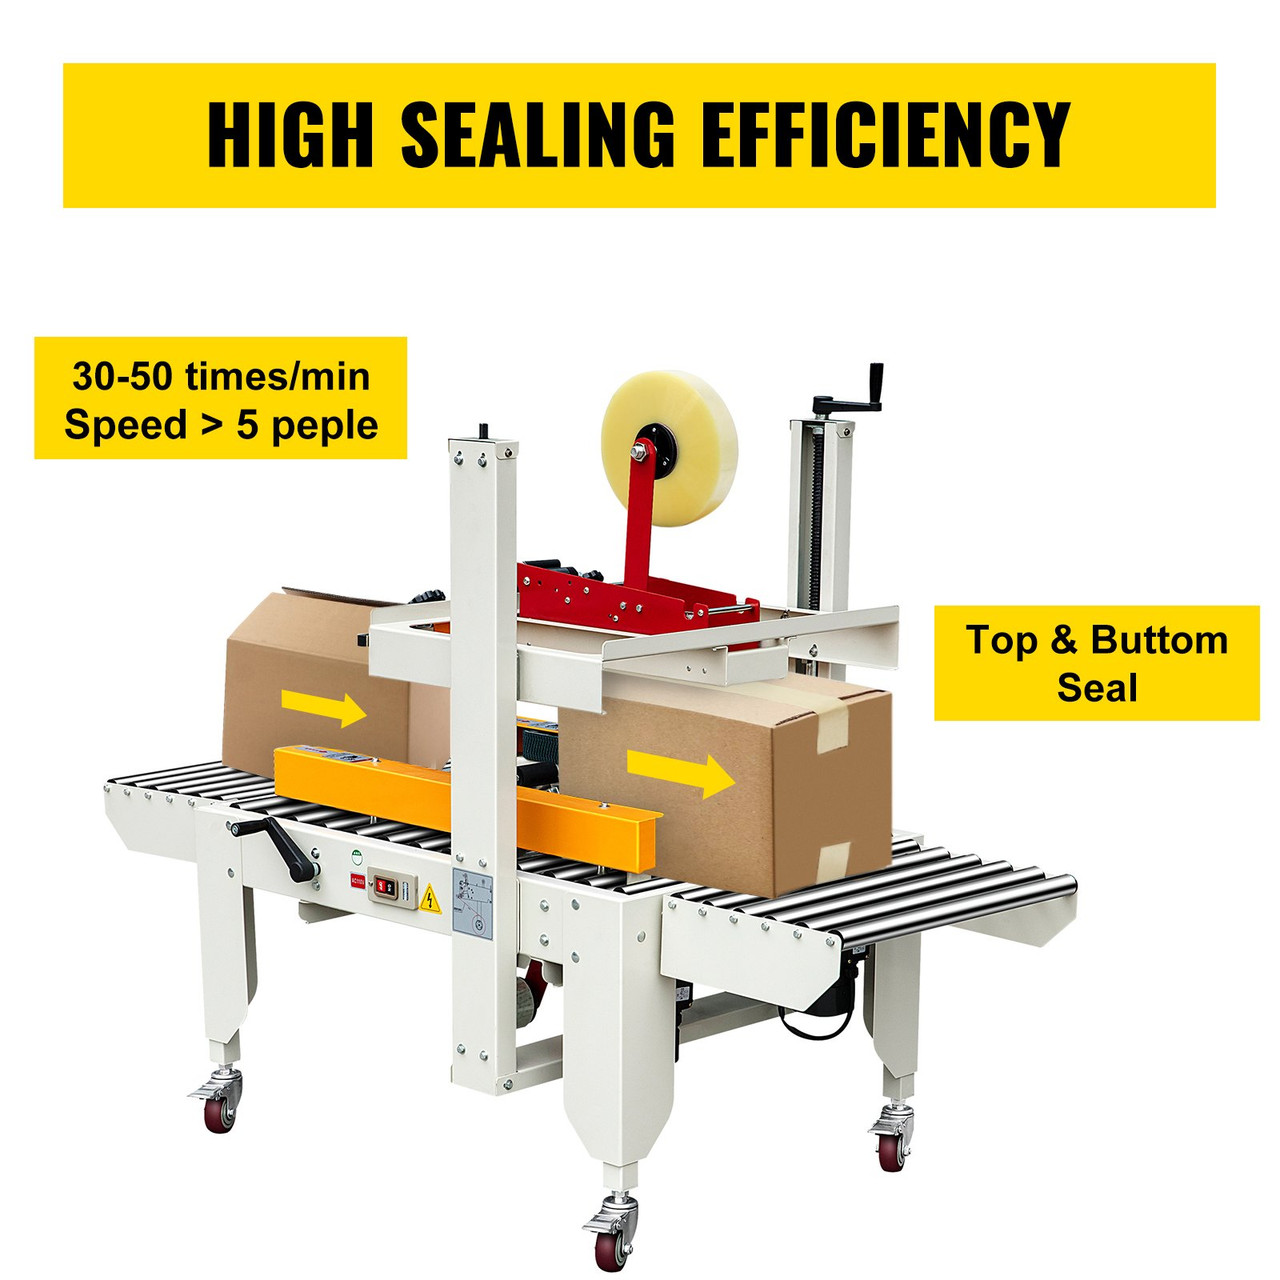 Case Sealer 180W Box Sealing Machine, Automatic Box Sealer, Double-Flap Case Sealer, Carton Sealer 0-18 m/min in Conveying Speed, Carton Taping Machine with Four Rolls of Tape